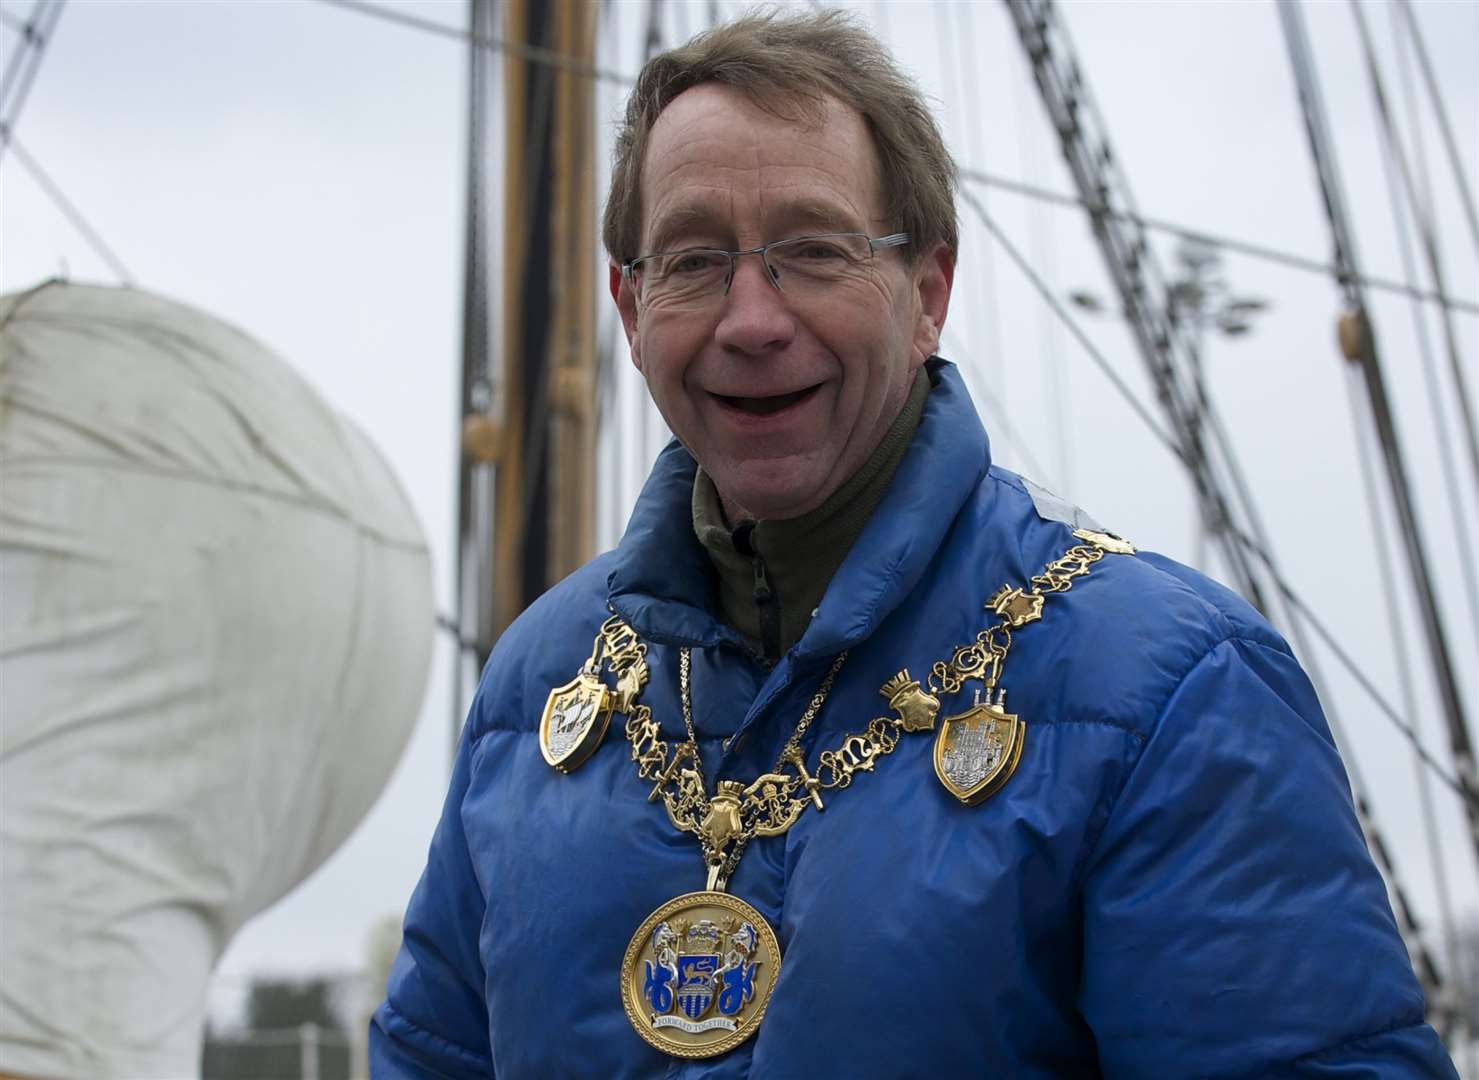 Vaughan Hewett, pictured in 2013 when he was Mayor of Medway. Picture: Andy Payton